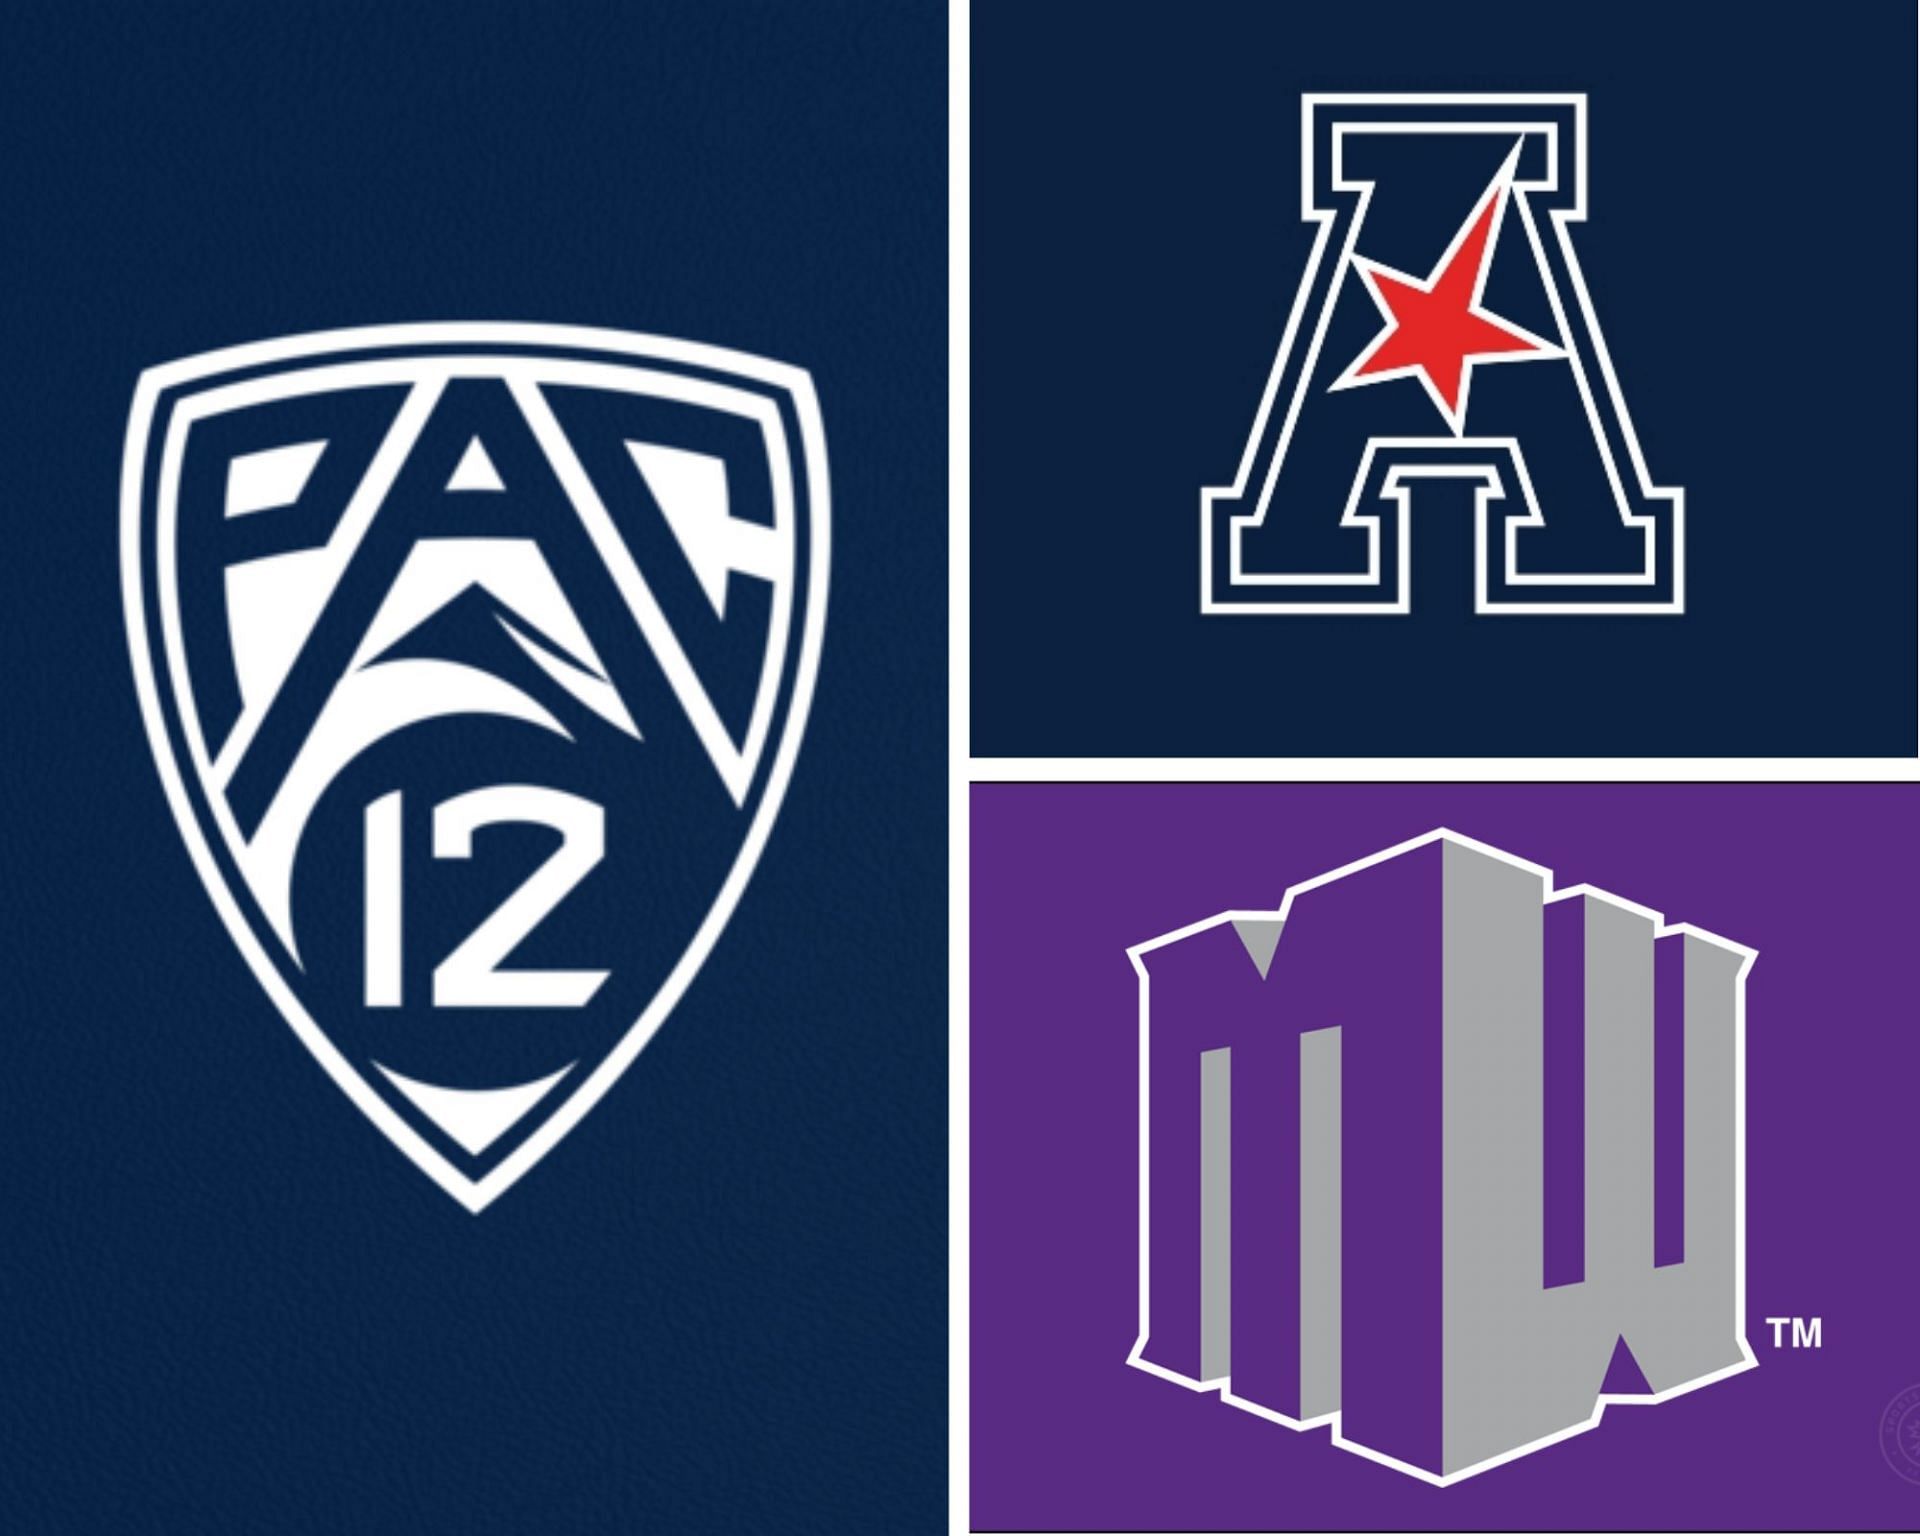 The AAC and the Mountain West are battling for the soul of the Pac-12